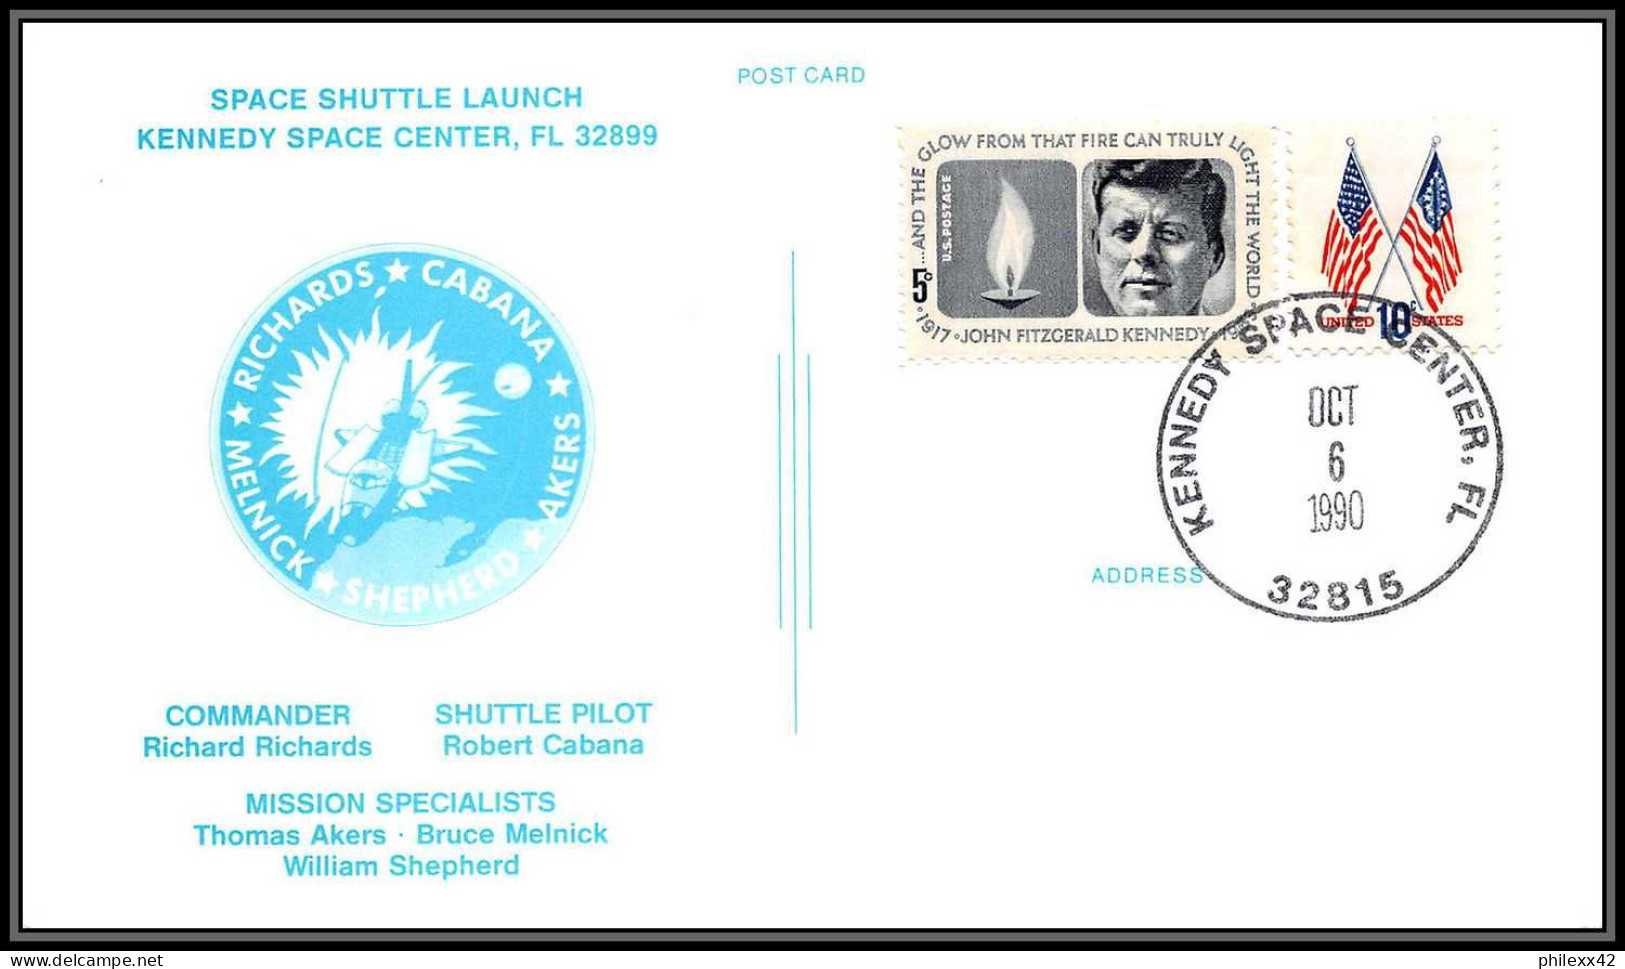 1843 Espace (space Raumfahrt) Lettre (cover Briefe) USA Start STS 41 Discovery Shuttle (navette) 6/10/1990 - Estados Unidos